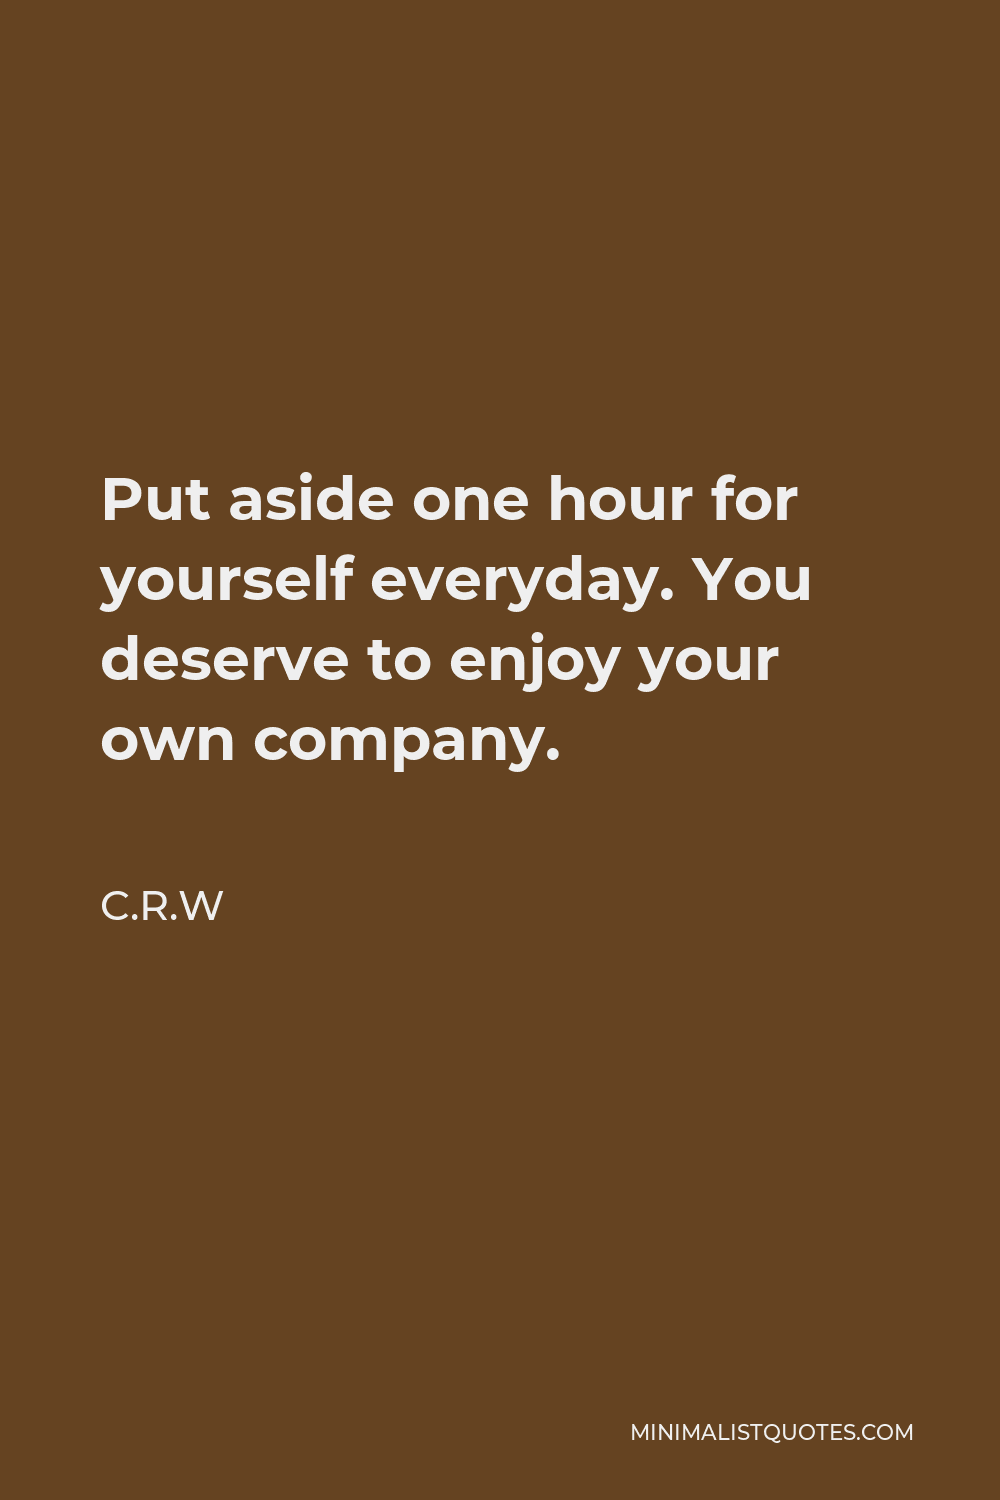 C.R.W Quote - Put aside one hour for yourself everyday. You deserve to enjoy your own company.